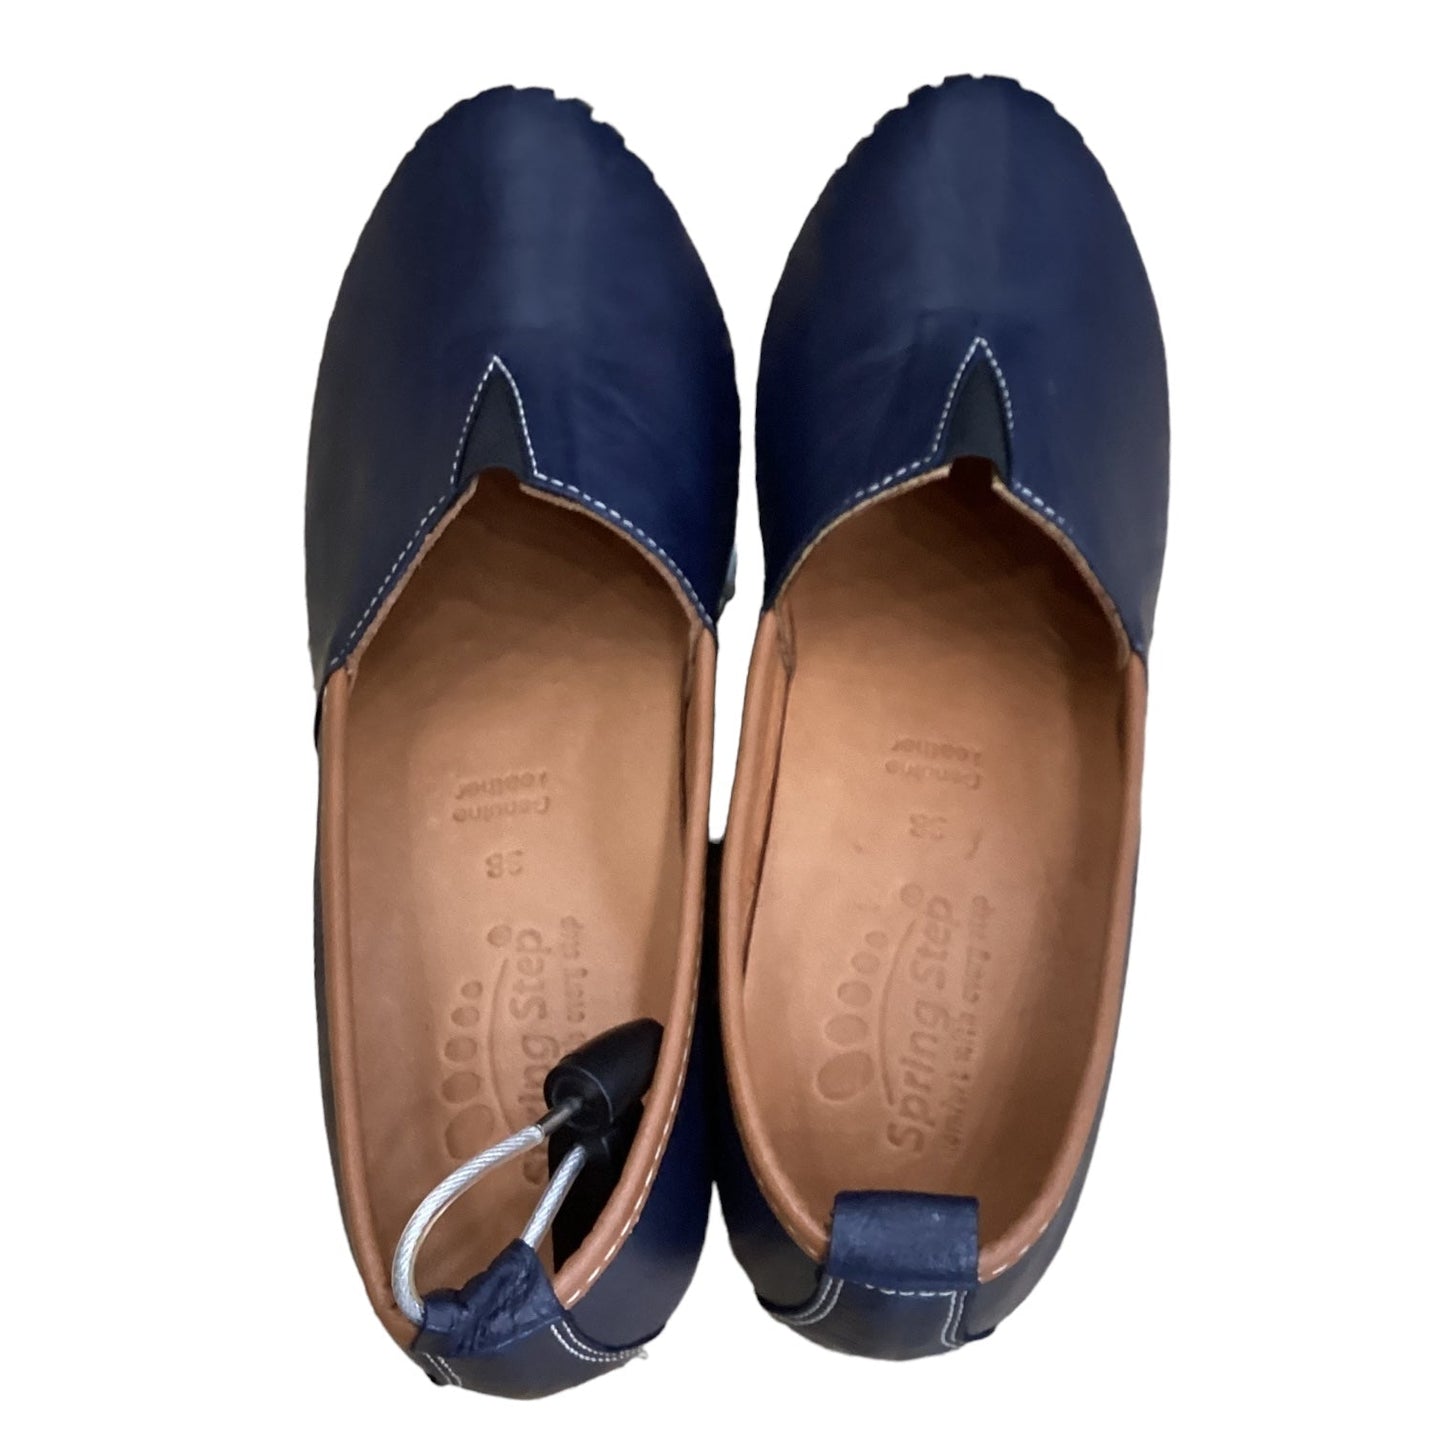 Navy Shoes Flats Spring Step, Size 7